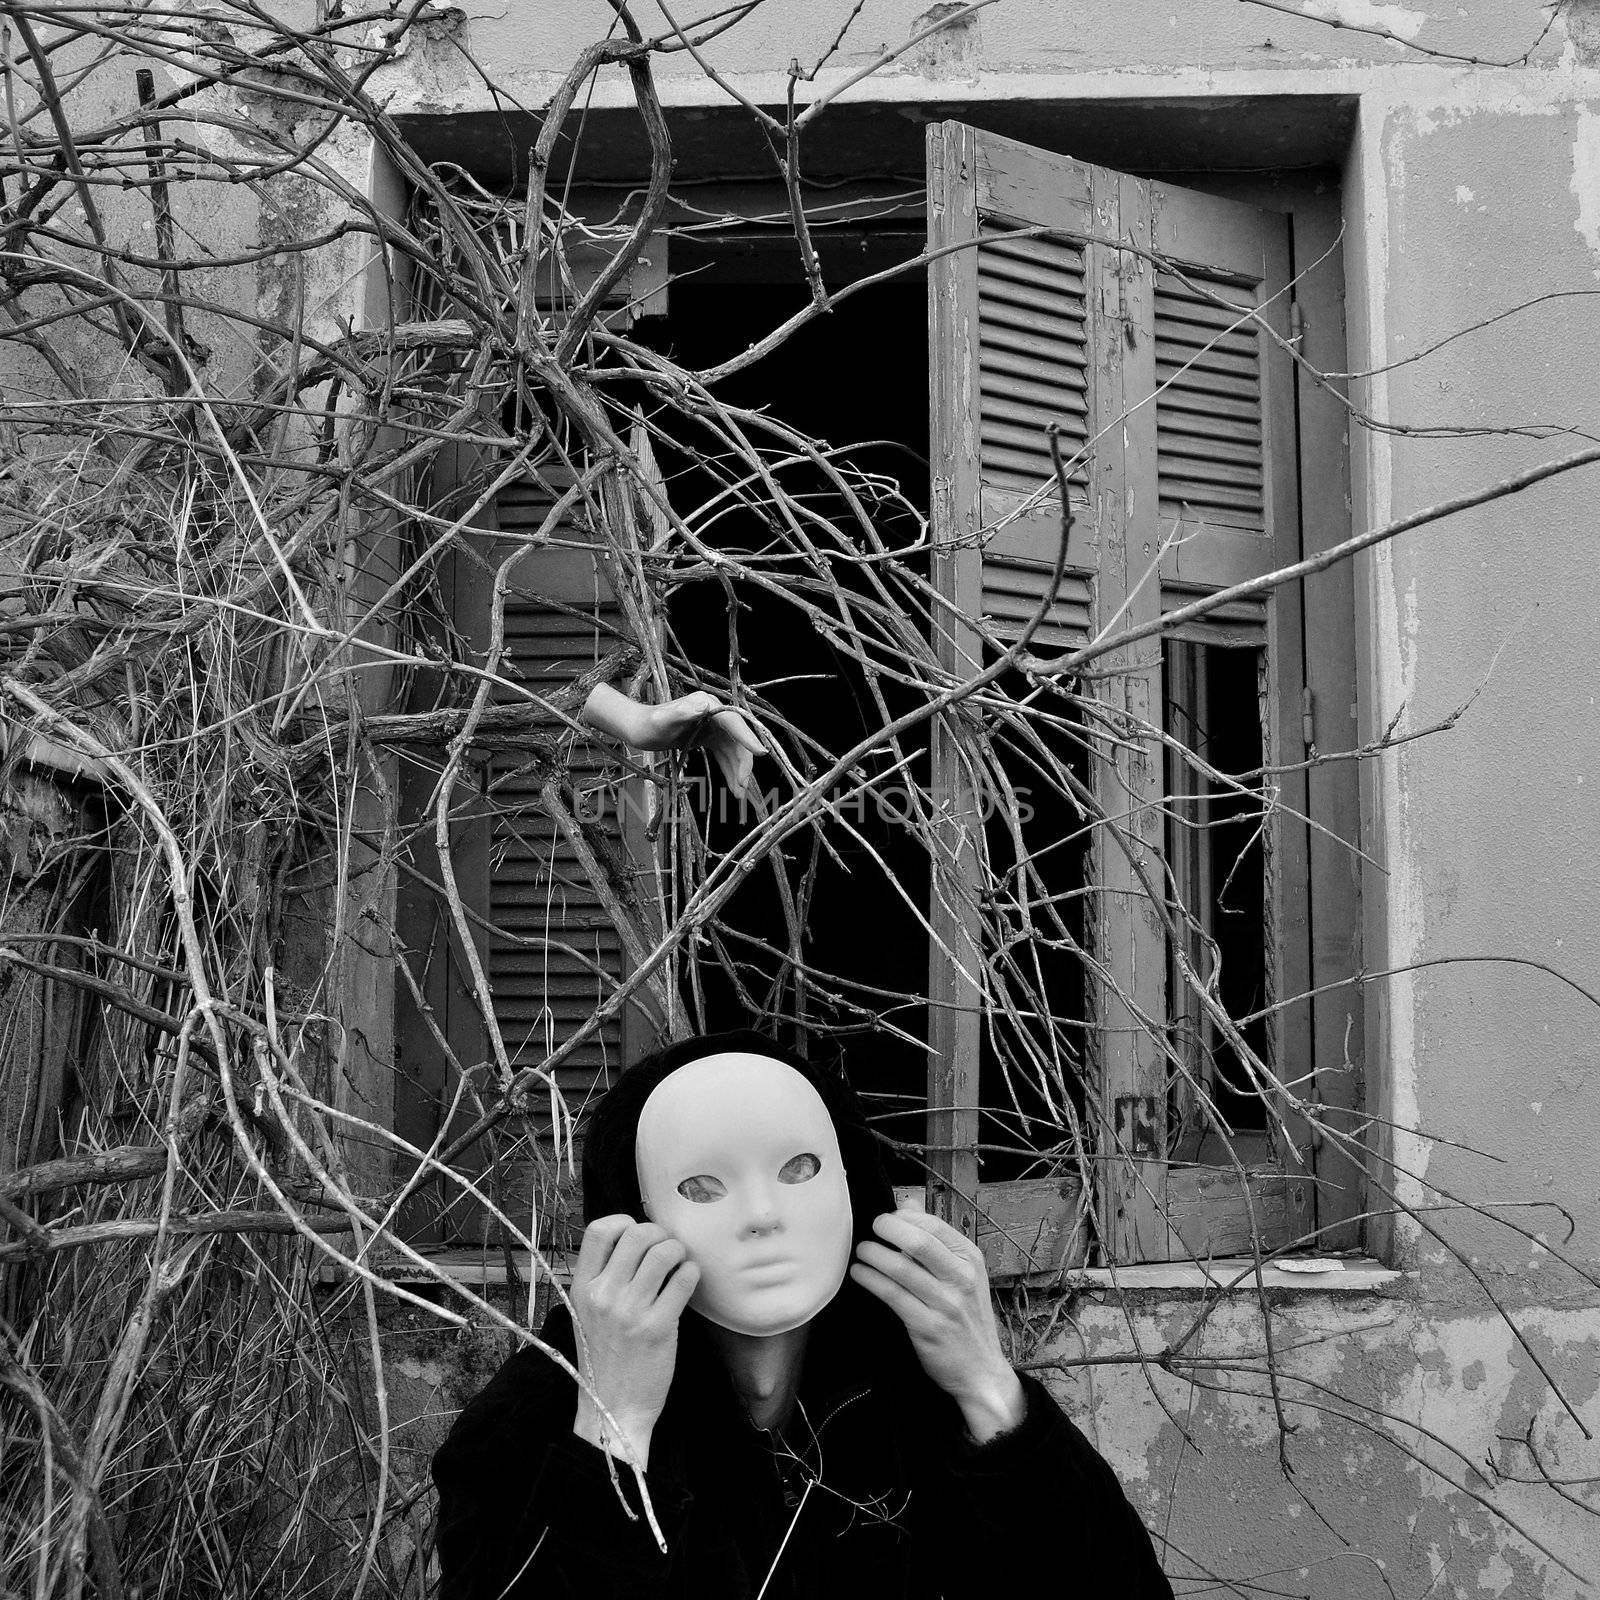 Figure with white mask under window with overgrown plants and doll hand. Black and white.